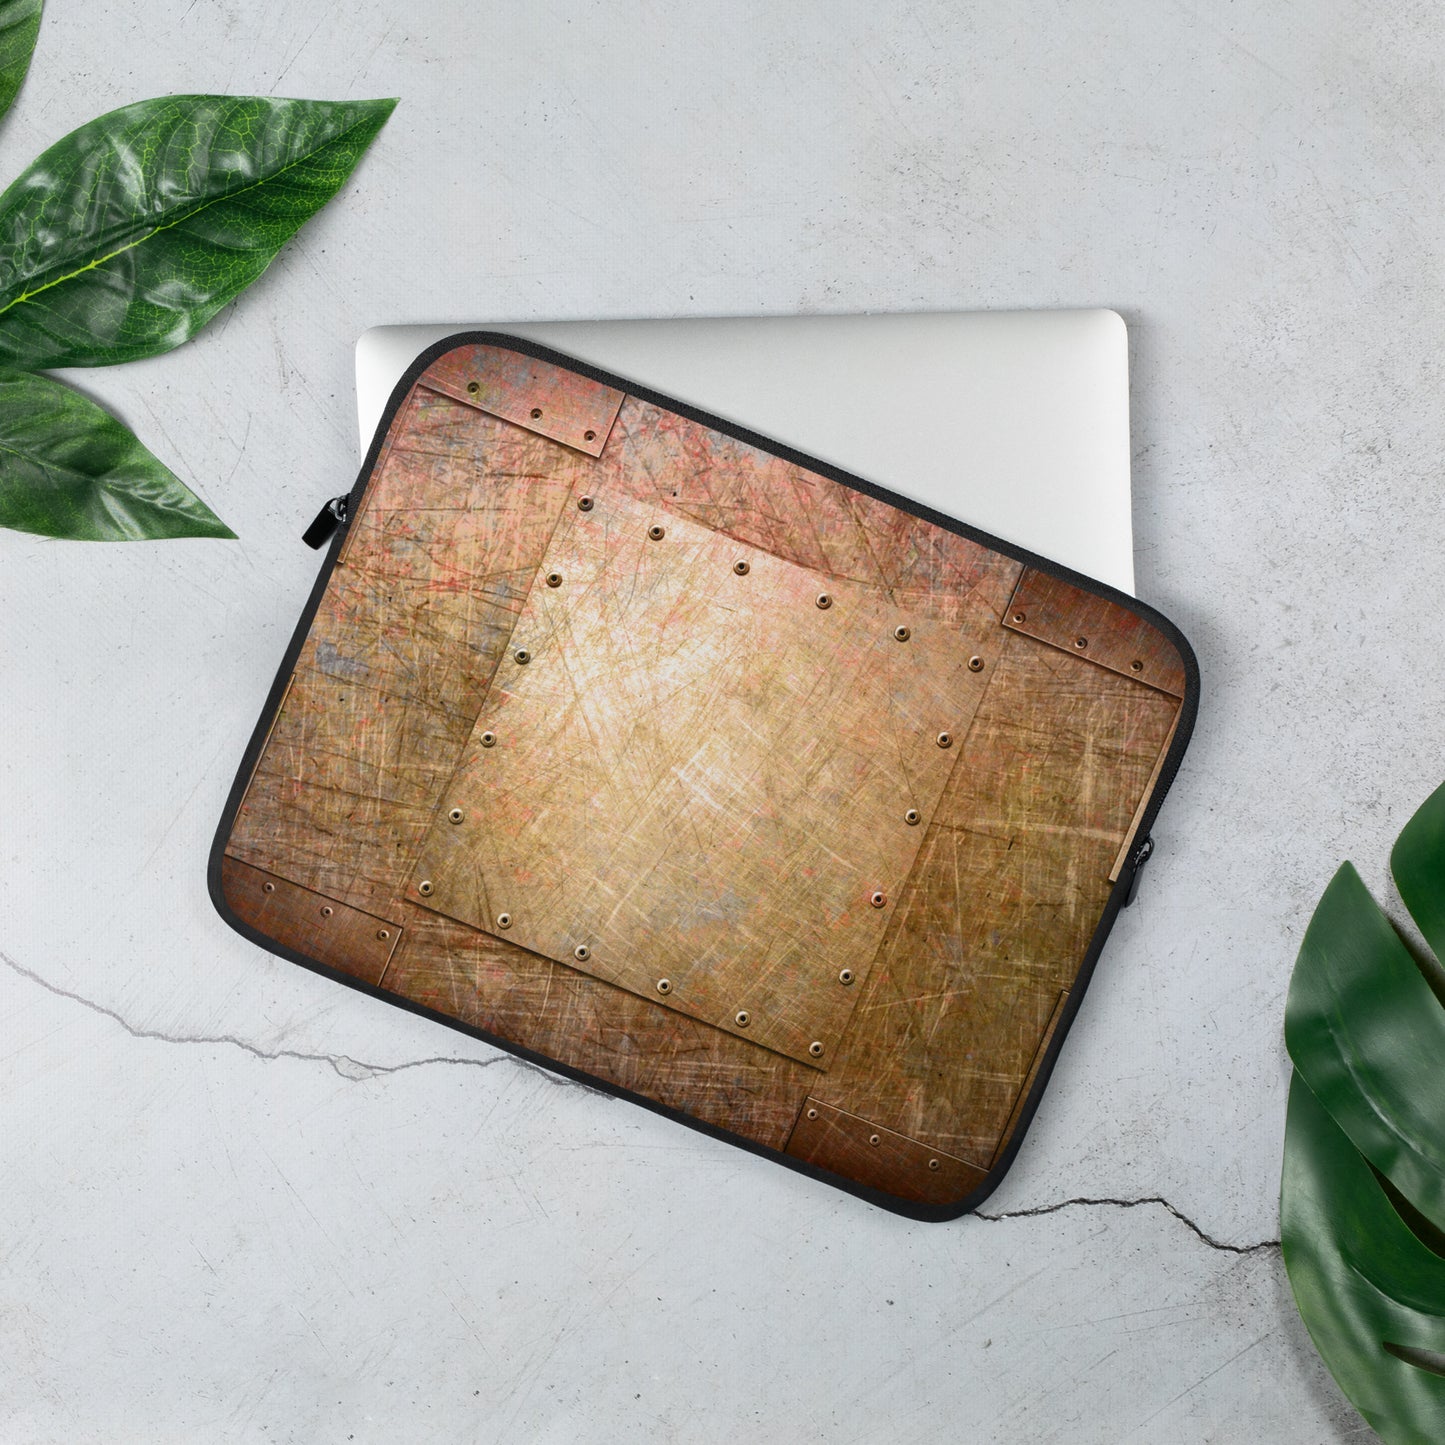 Steampunk Themed Laptop Sleeve - Distressed Riveted Copper Sheets Print on Computer Bag 13 inches